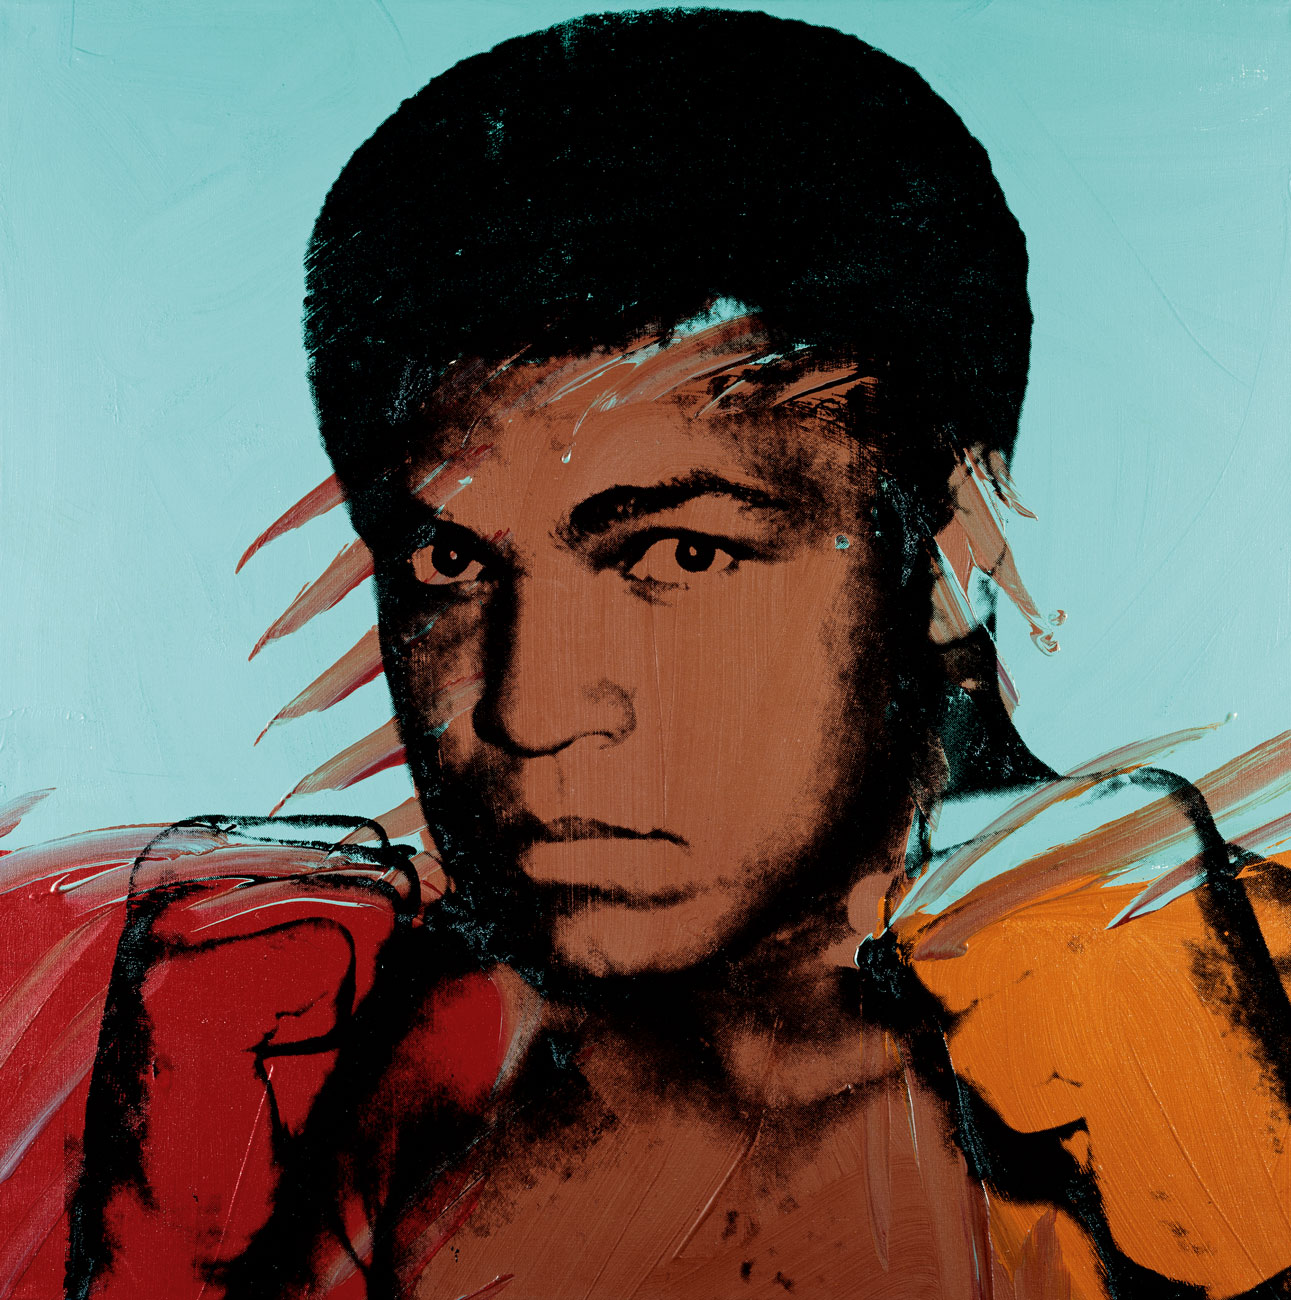 Andy Warhol, Muhammad Ali, fall 1977, acrylic and silkscreen ink on canvas, 40 x 40 inches, 101.6 x 101.6 cm. Collection of Lorenzo and Teresa Fertitta
© The Andy Warhol Foundation for the Visual Arts, Inc., NY